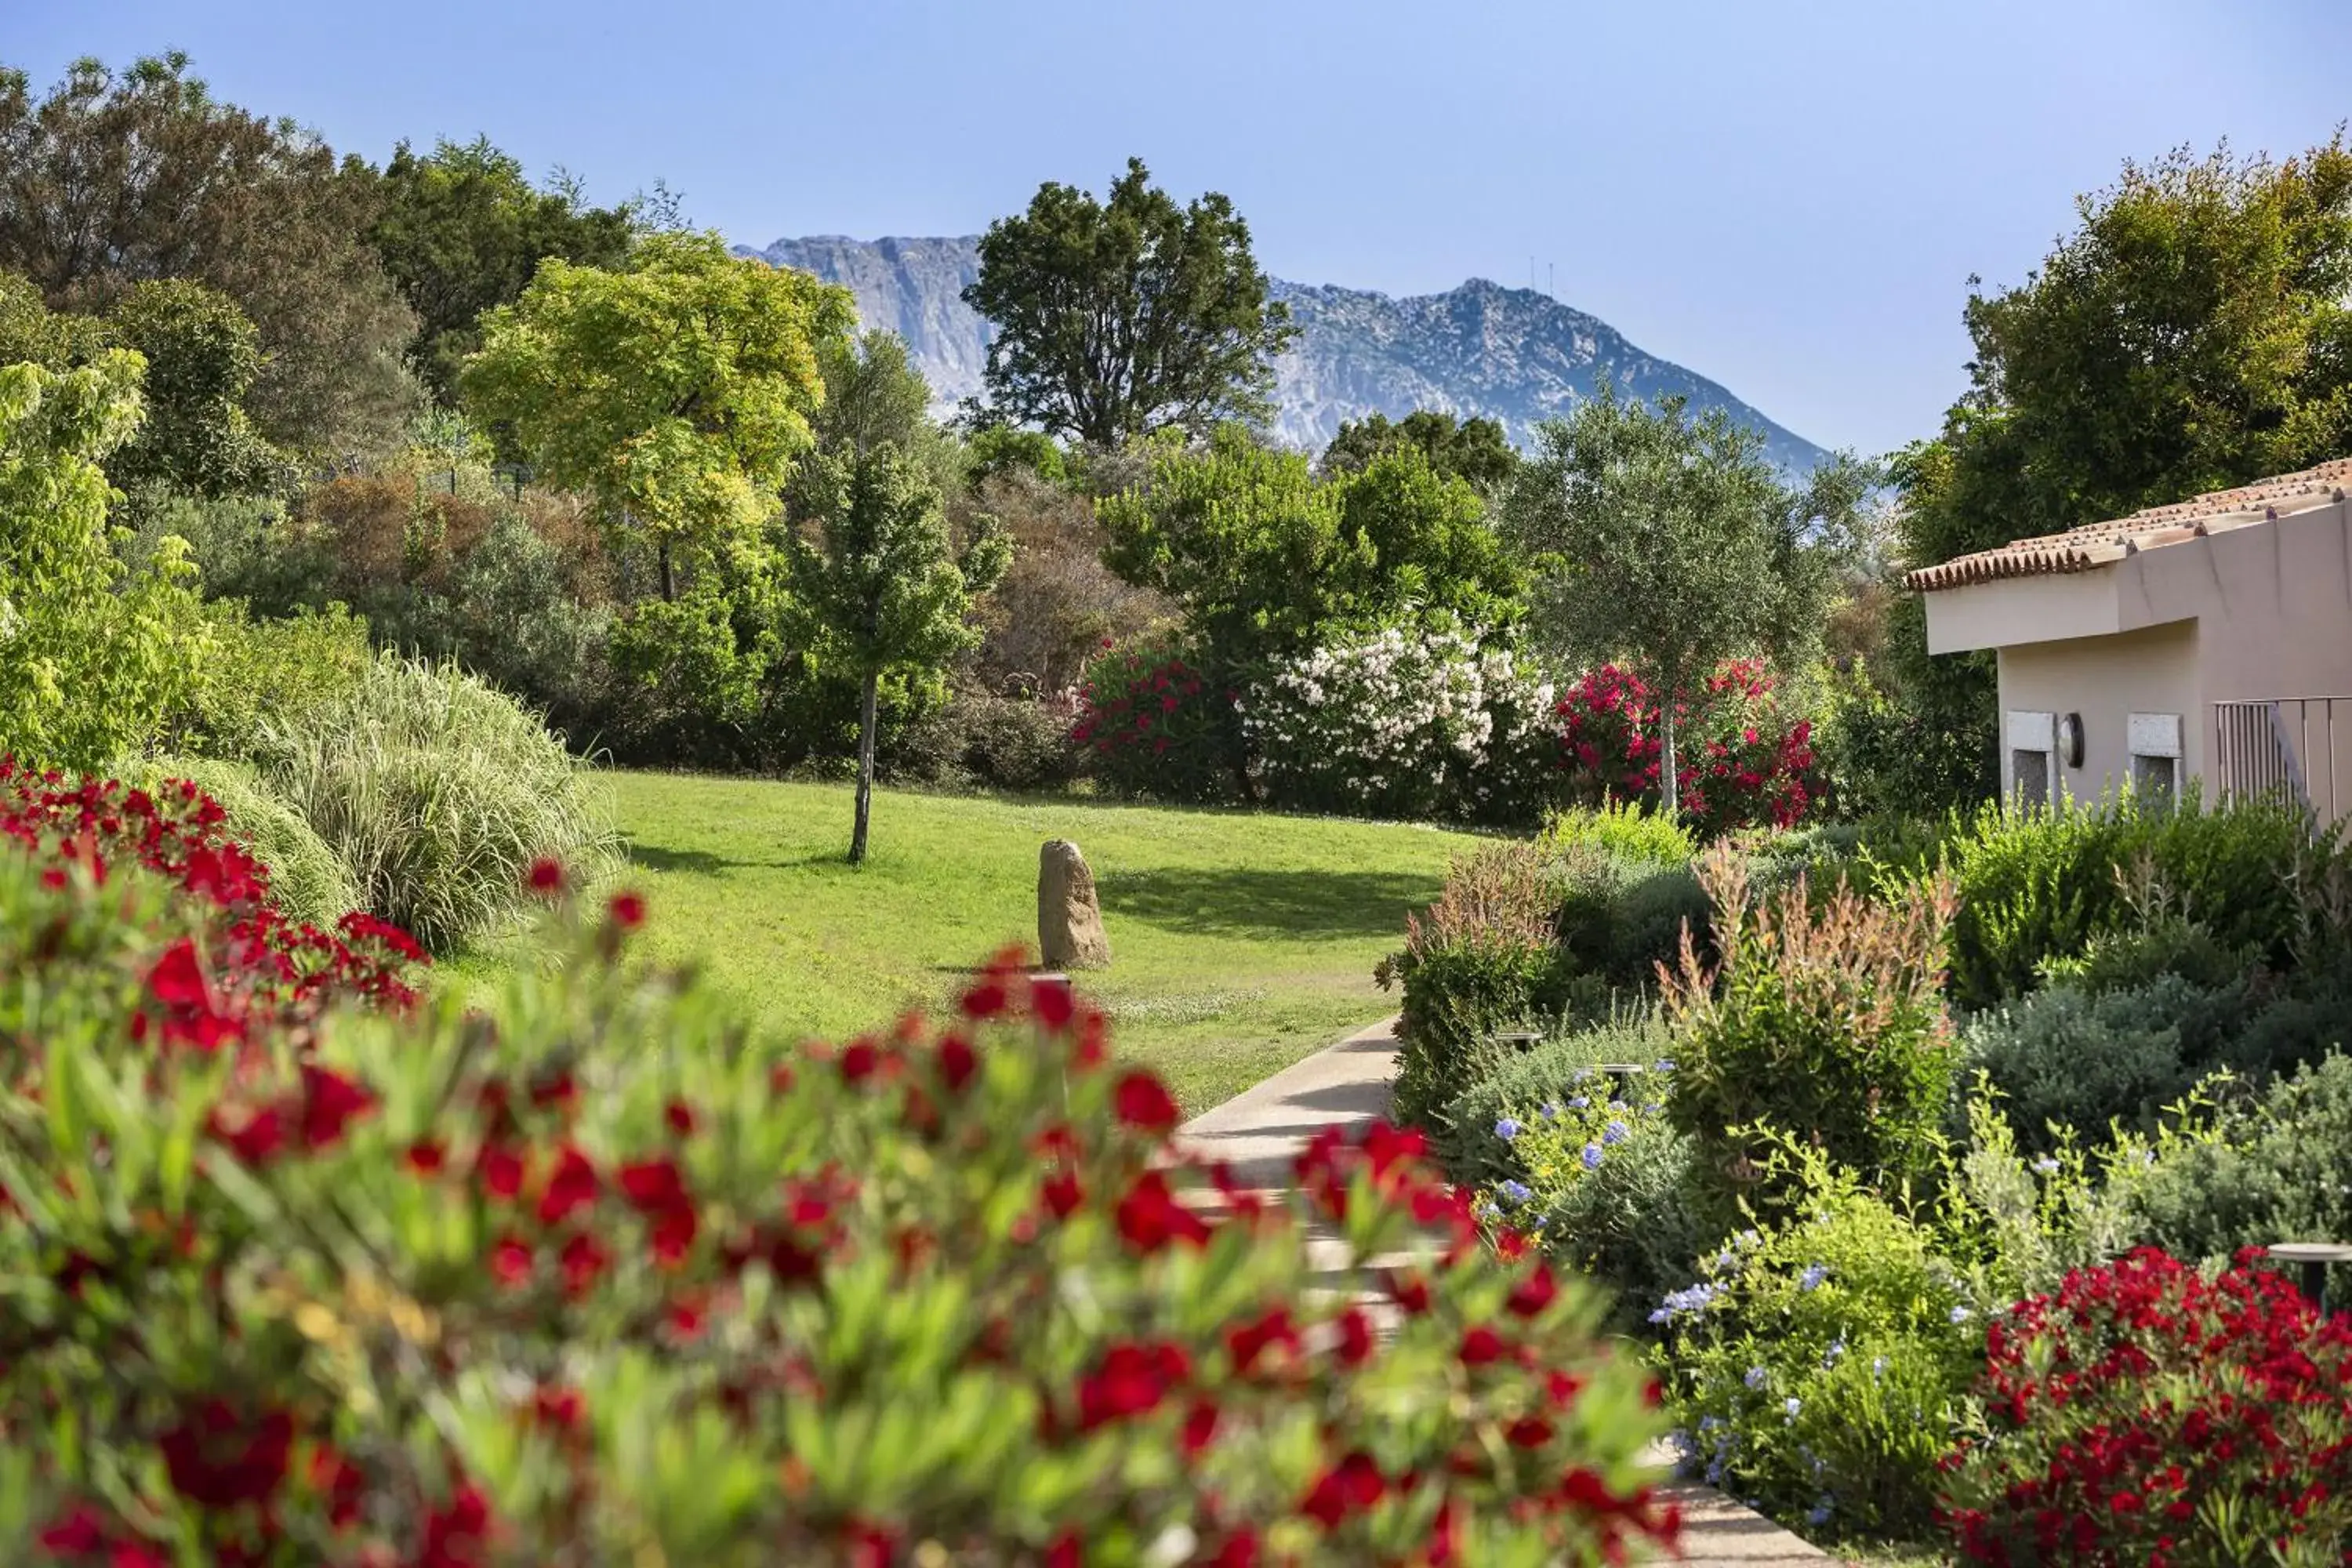 Garden in Baglioni Resort Sardinia - The Leading Hotels of the World